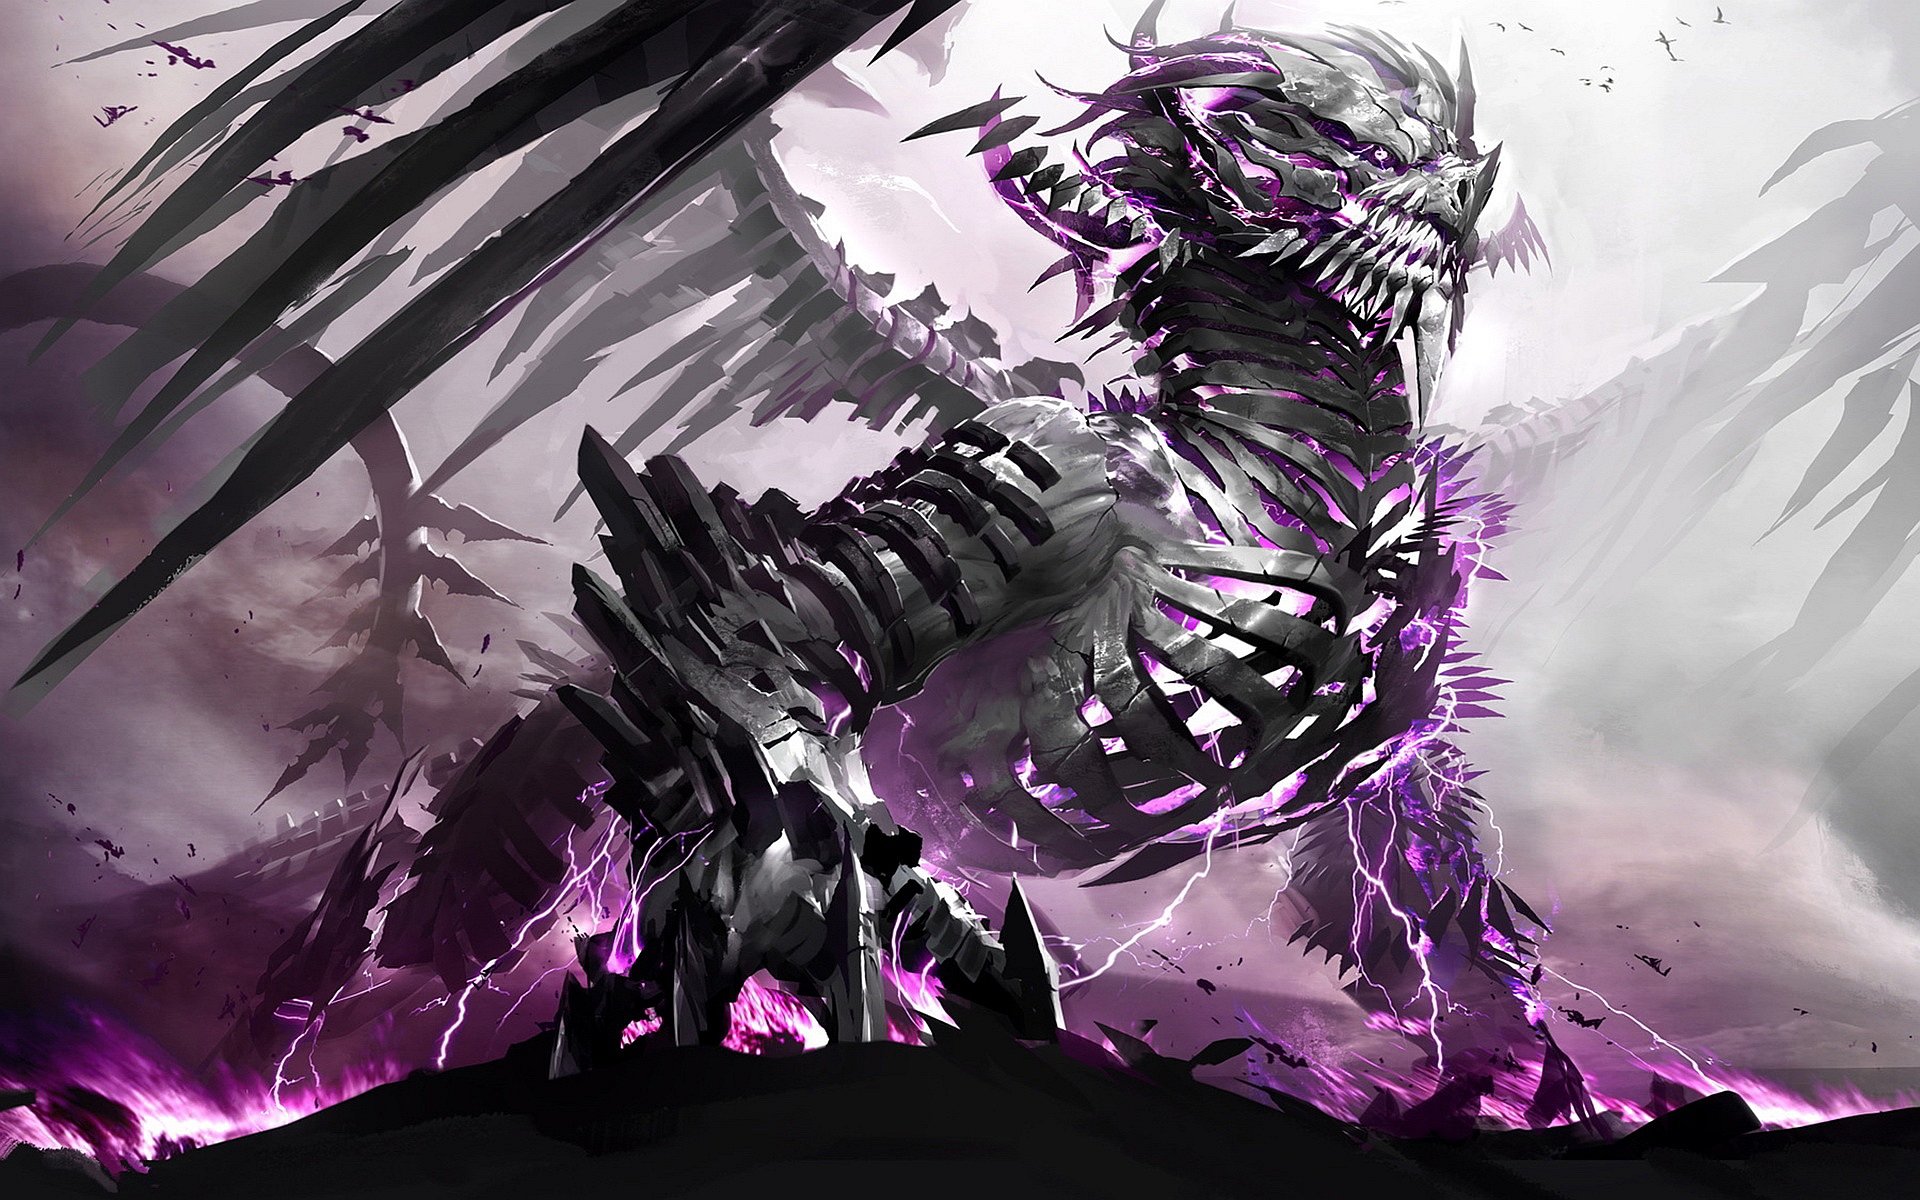 Cool Dragon Backgrounds